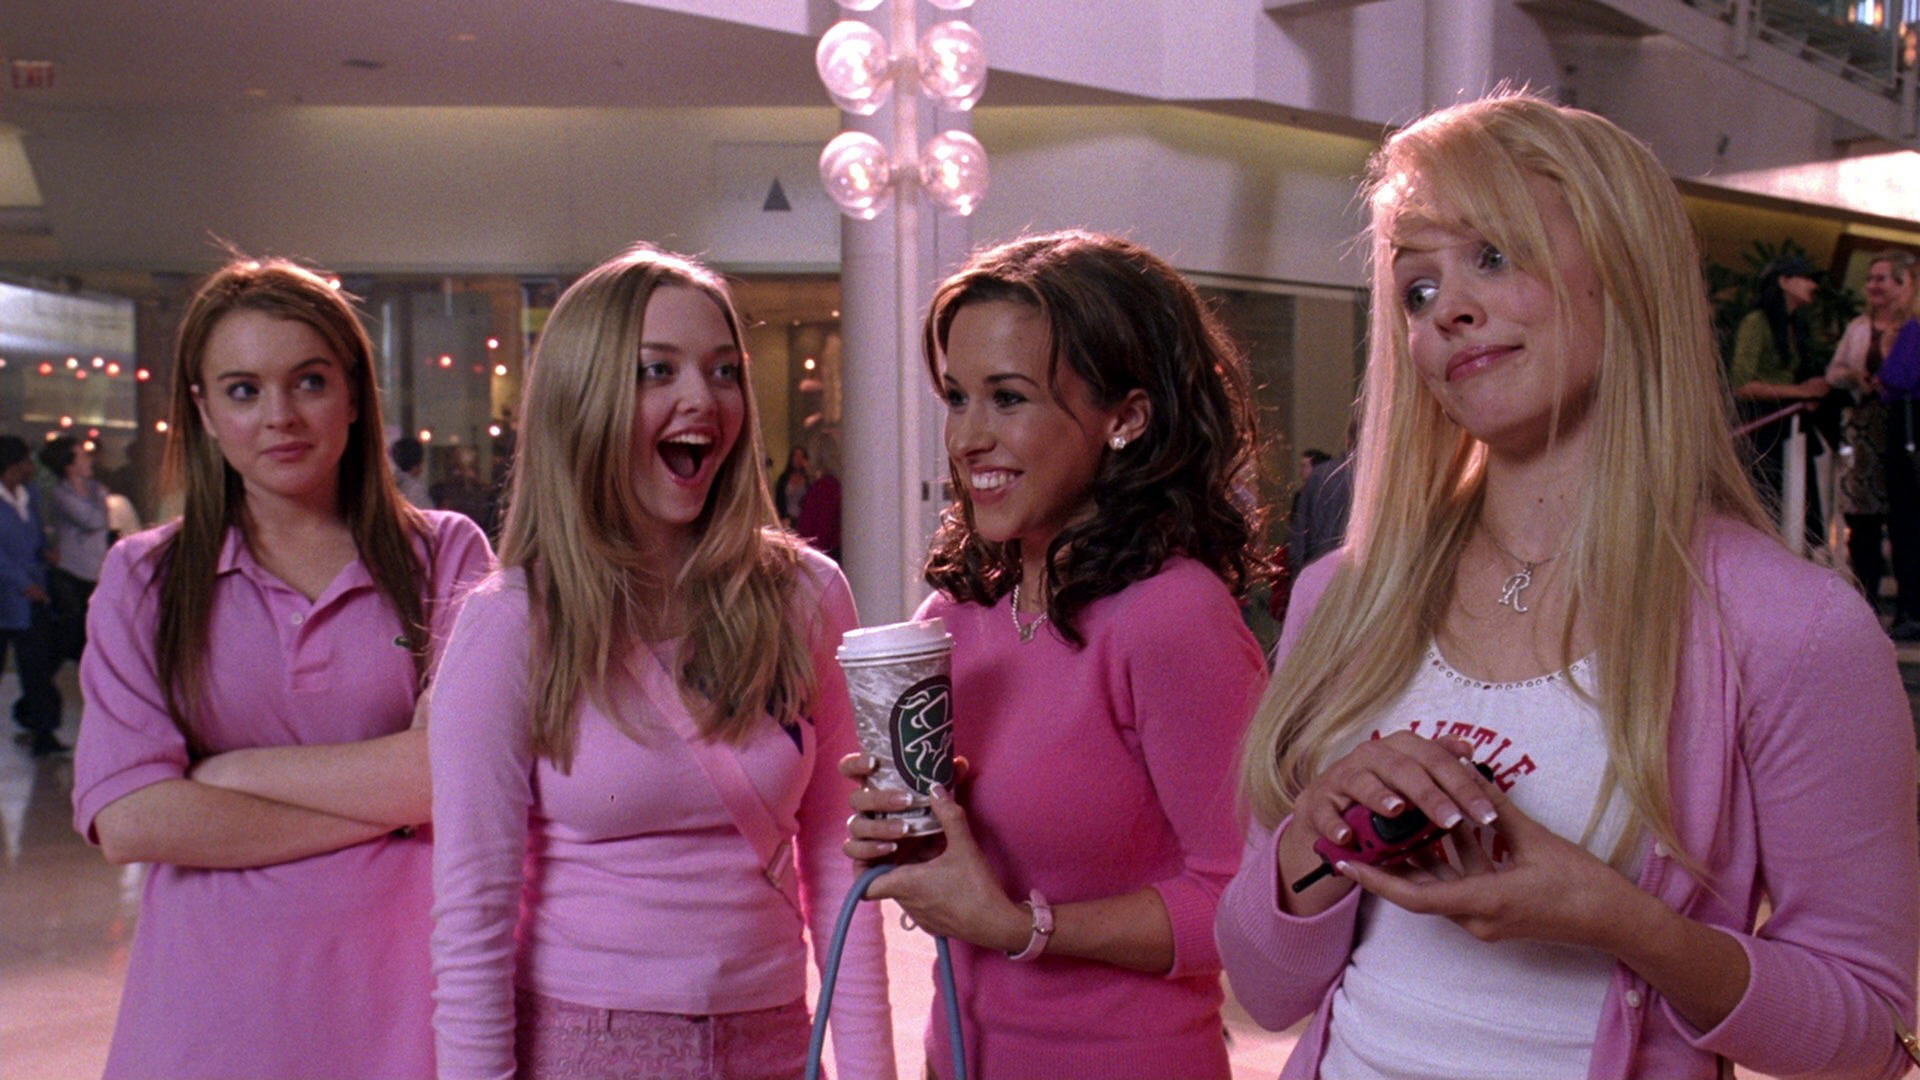 Here Are What the Cars of Mean Girls Could Be Today